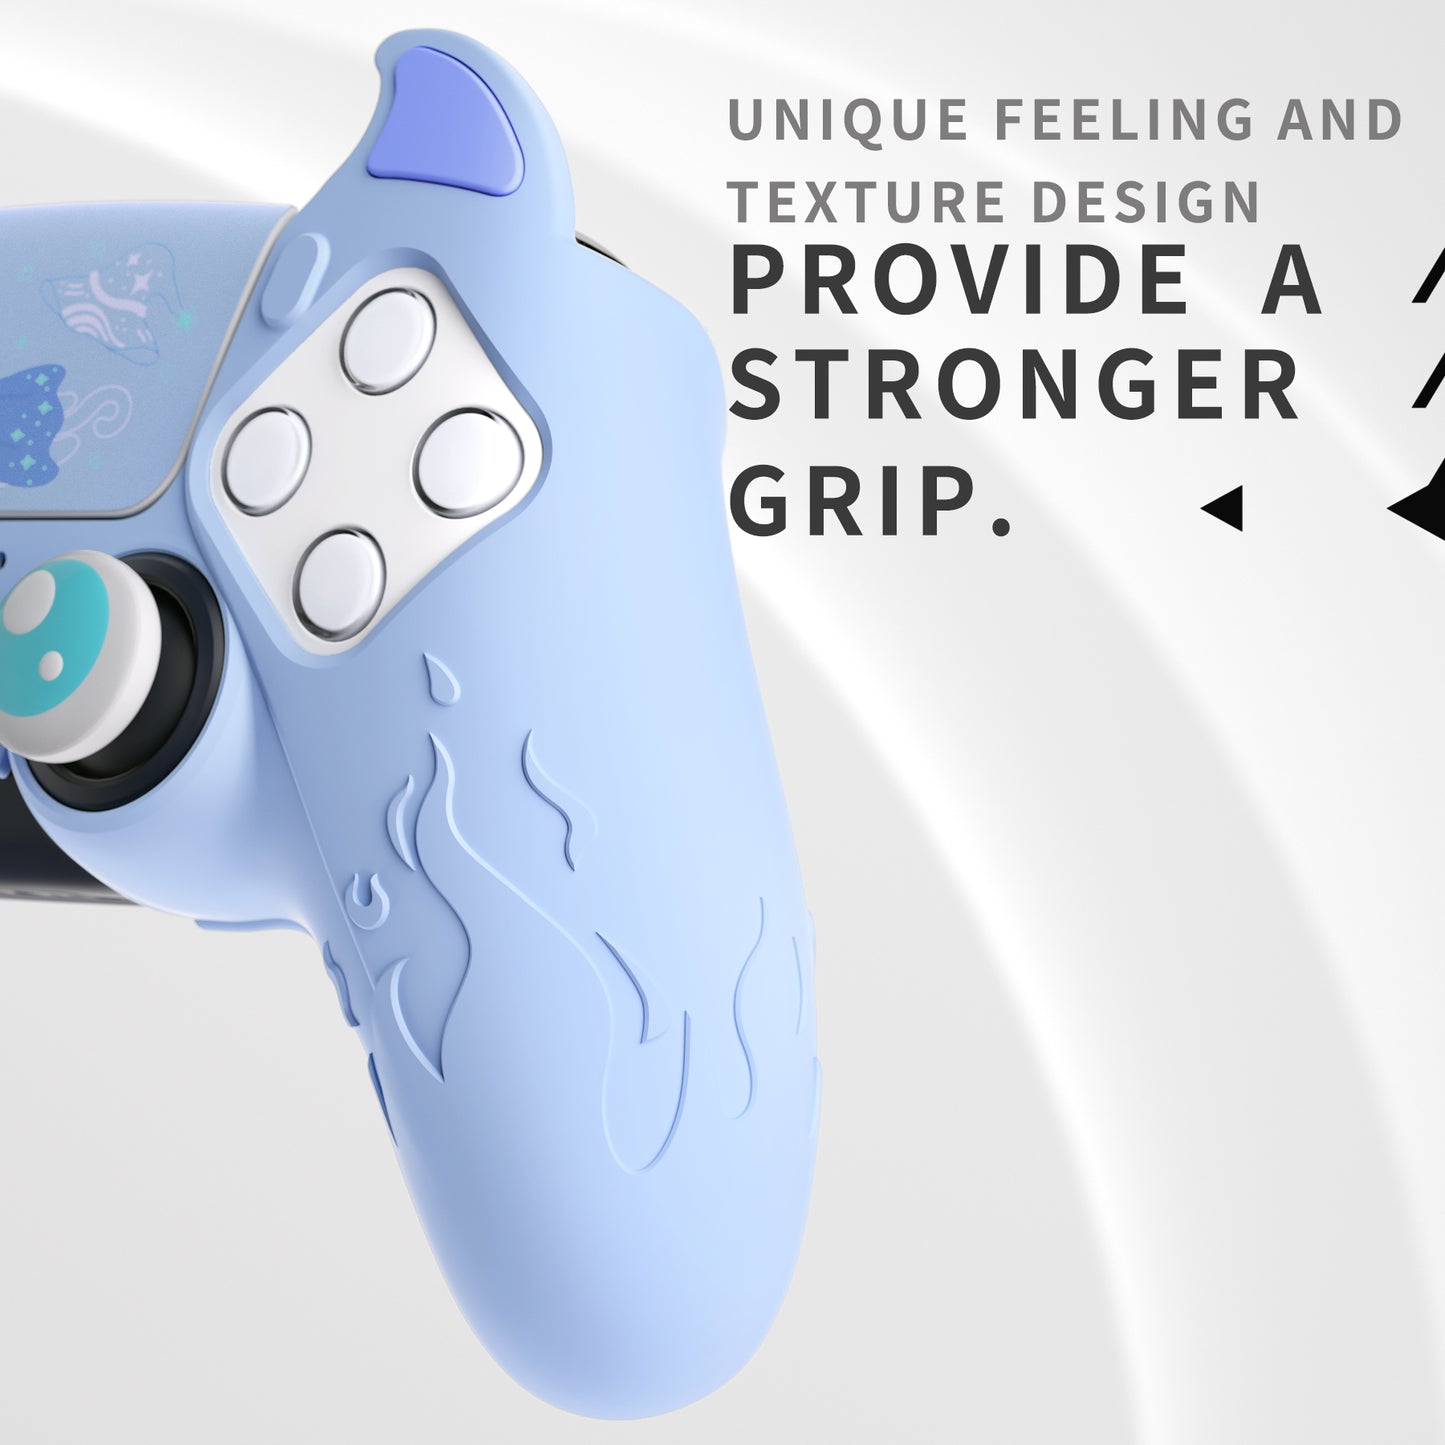 PlayVital Cute Demon Controller Silicone Case with Thumb Grips for PS5 Wireless Controller, Compatible with Charging Station - Blue - DEPFP004 PlayVital